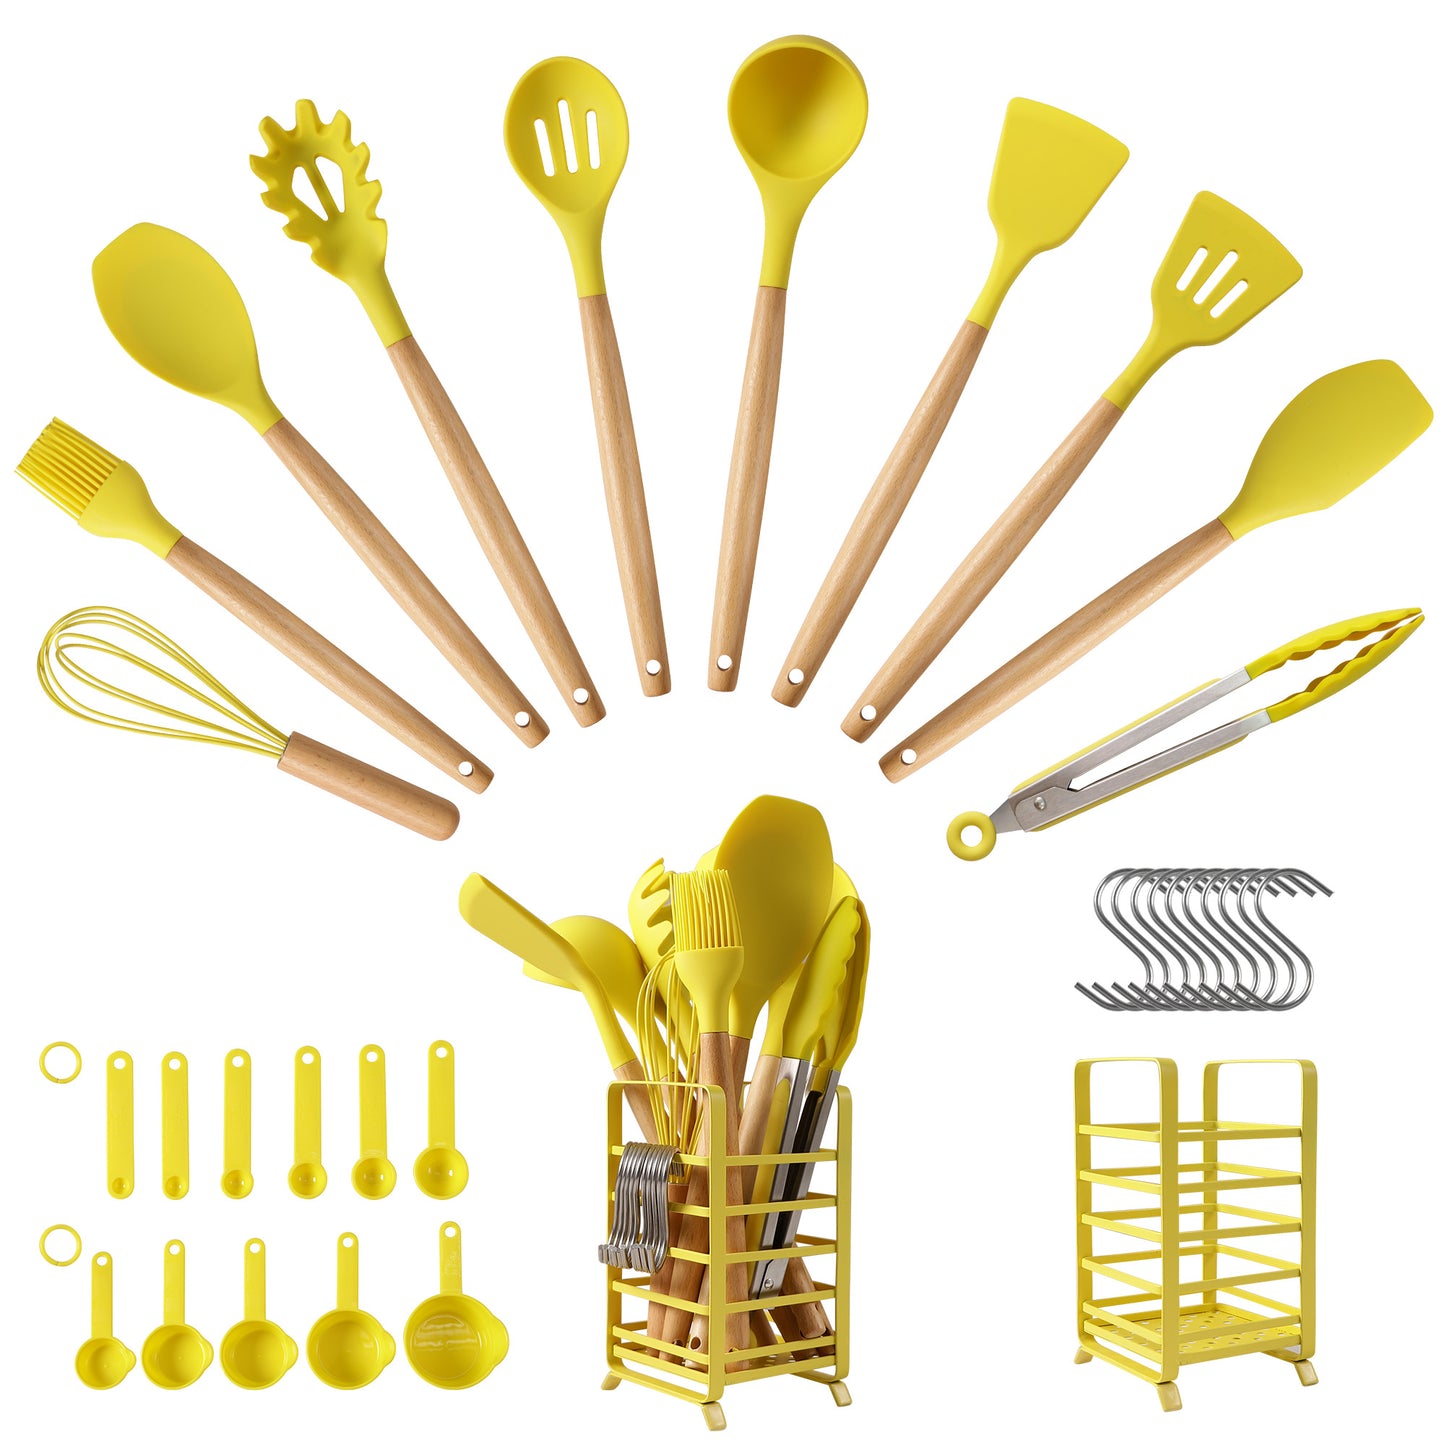 Hecef 32 PCS Kitchen Utensils Set, Silicone Cooking Utensils Set with Stainless Steel Holder, 446°F Heat Resistant Food Grade Kitchen Gadgets Tools Set Wooden Handle for Nonstick Cookware - Hecef Kitchen